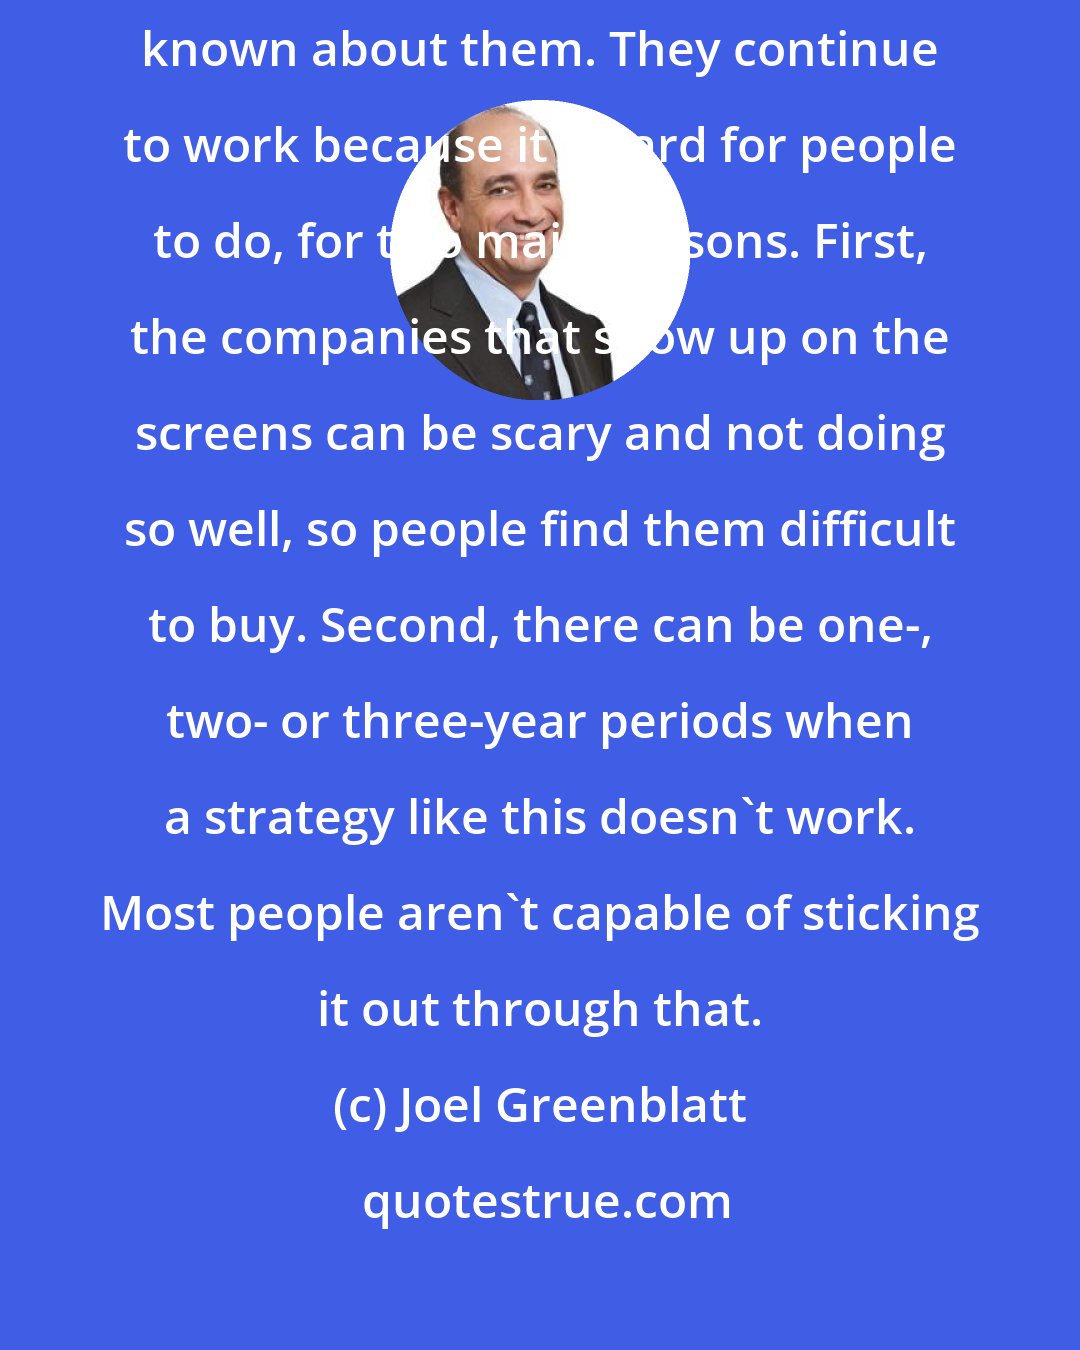 Joel Greenblatt: Value investing strategies have worked for years and everyone's known about them. They continue to work because it's hard for people to do, for two main reasons. First, the companies that show up on the screens can be scary and not doing so well, so people find them difficult to buy. Second, there can be one-, two- or three-year periods when a strategy like this doesn't work. Most people aren't capable of sticking it out through that.